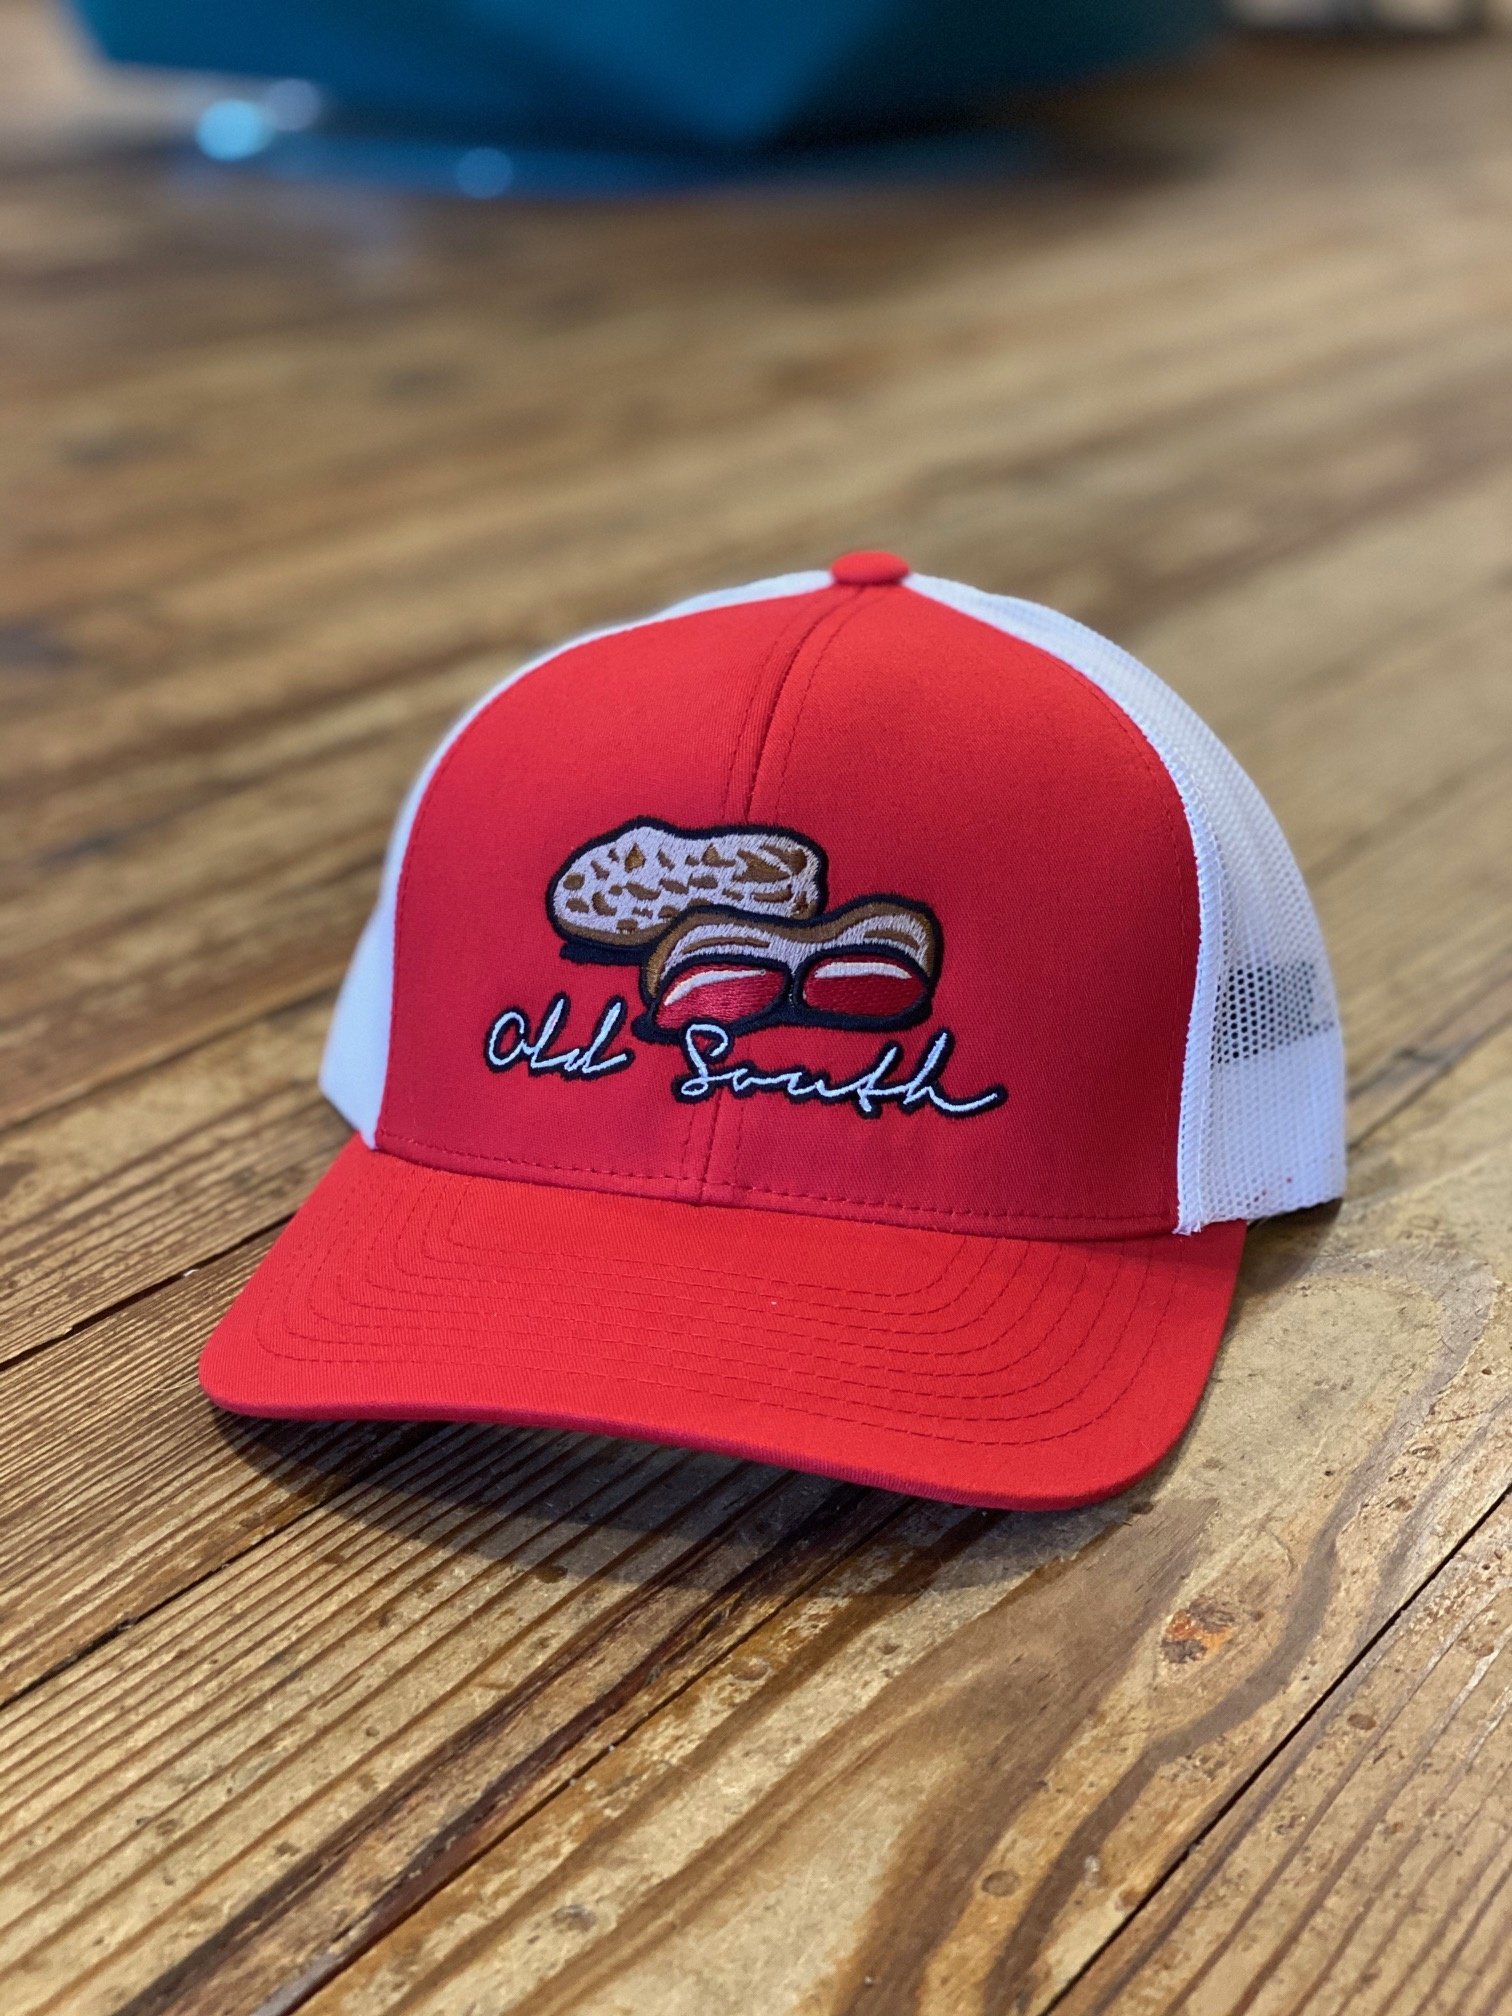 Old South Old South Peanut Pile Trucker Hat Red and White ...